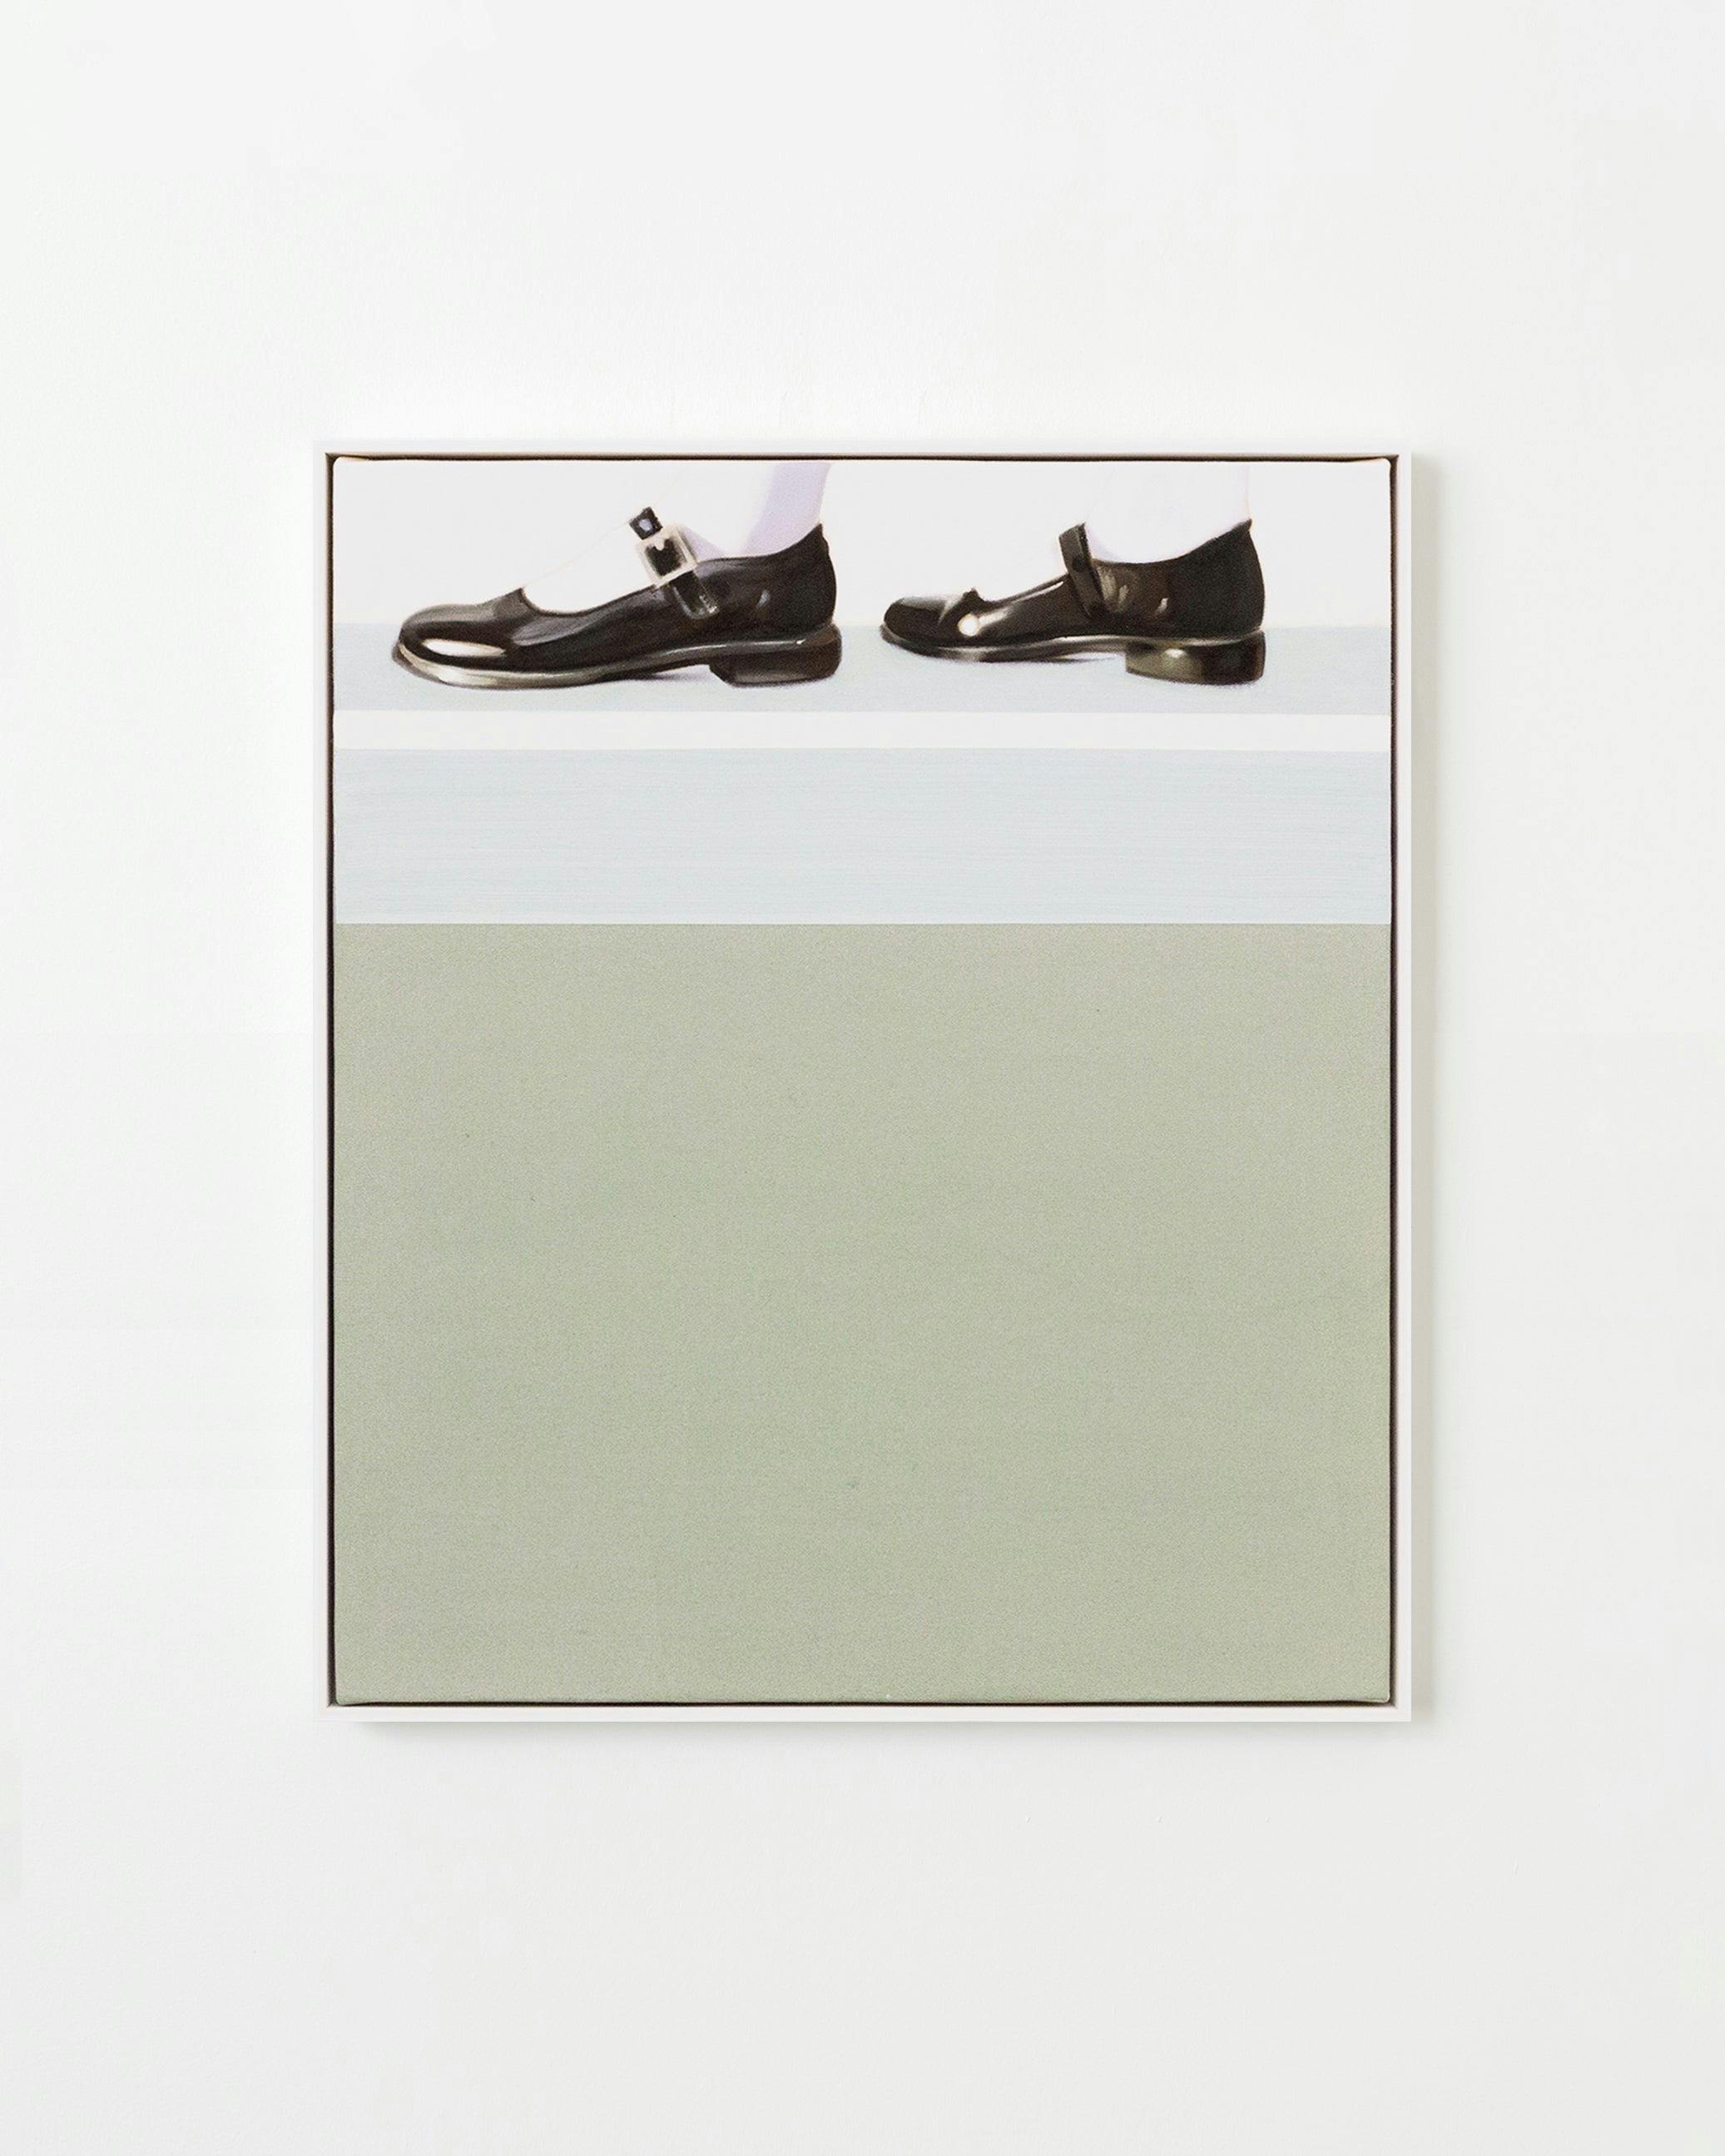 Painting by Bryce Anderson titled "C's Shoes Left".